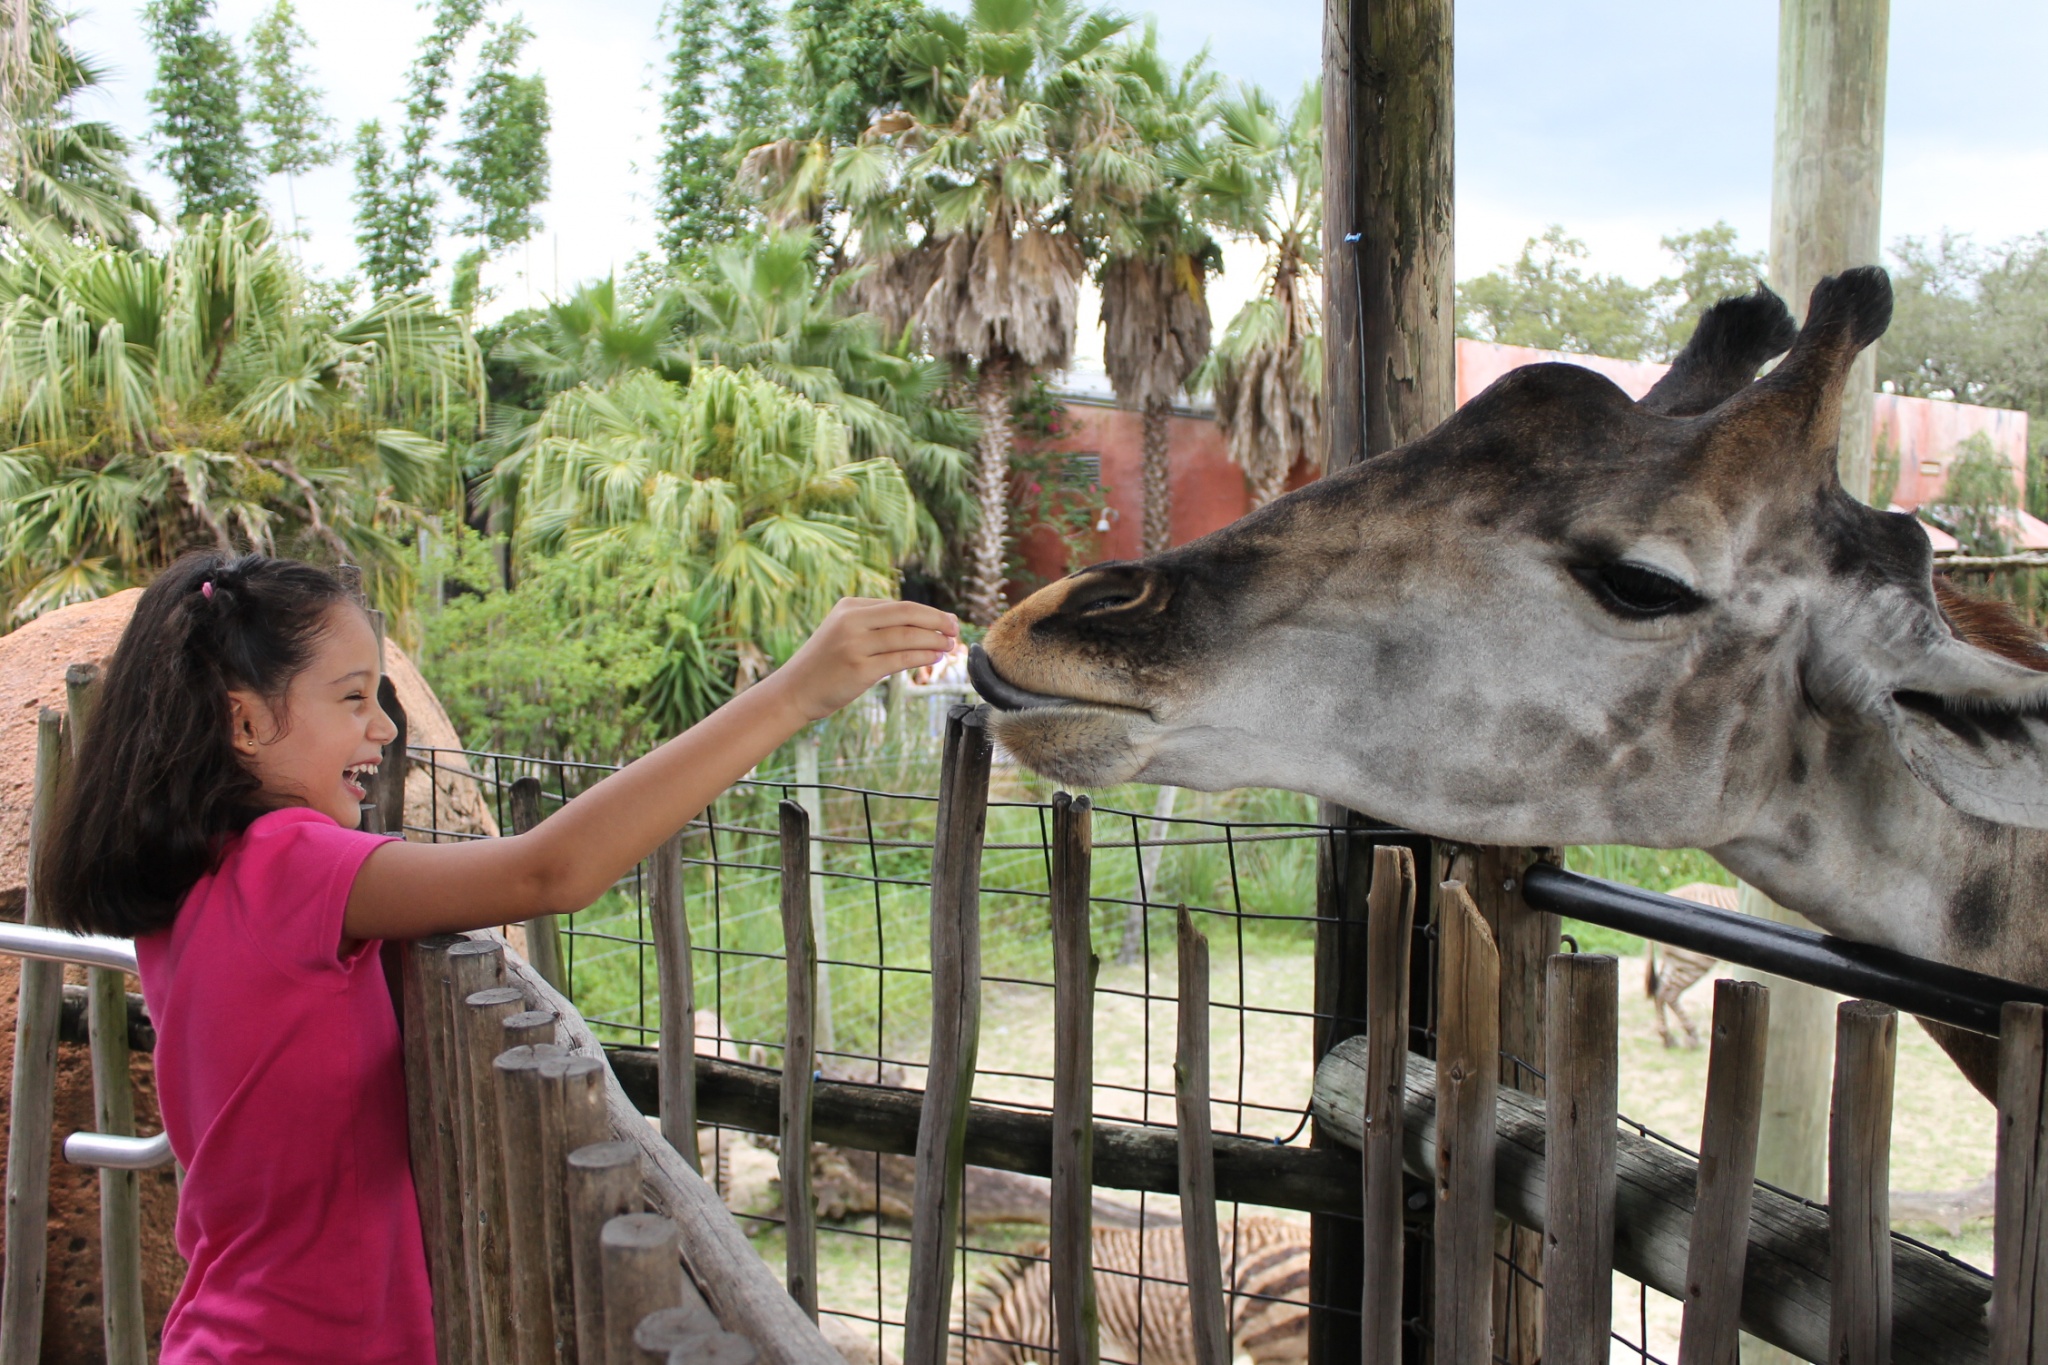 Up Close And Personal With The Animals At Tampa's Lowry Park Zoo